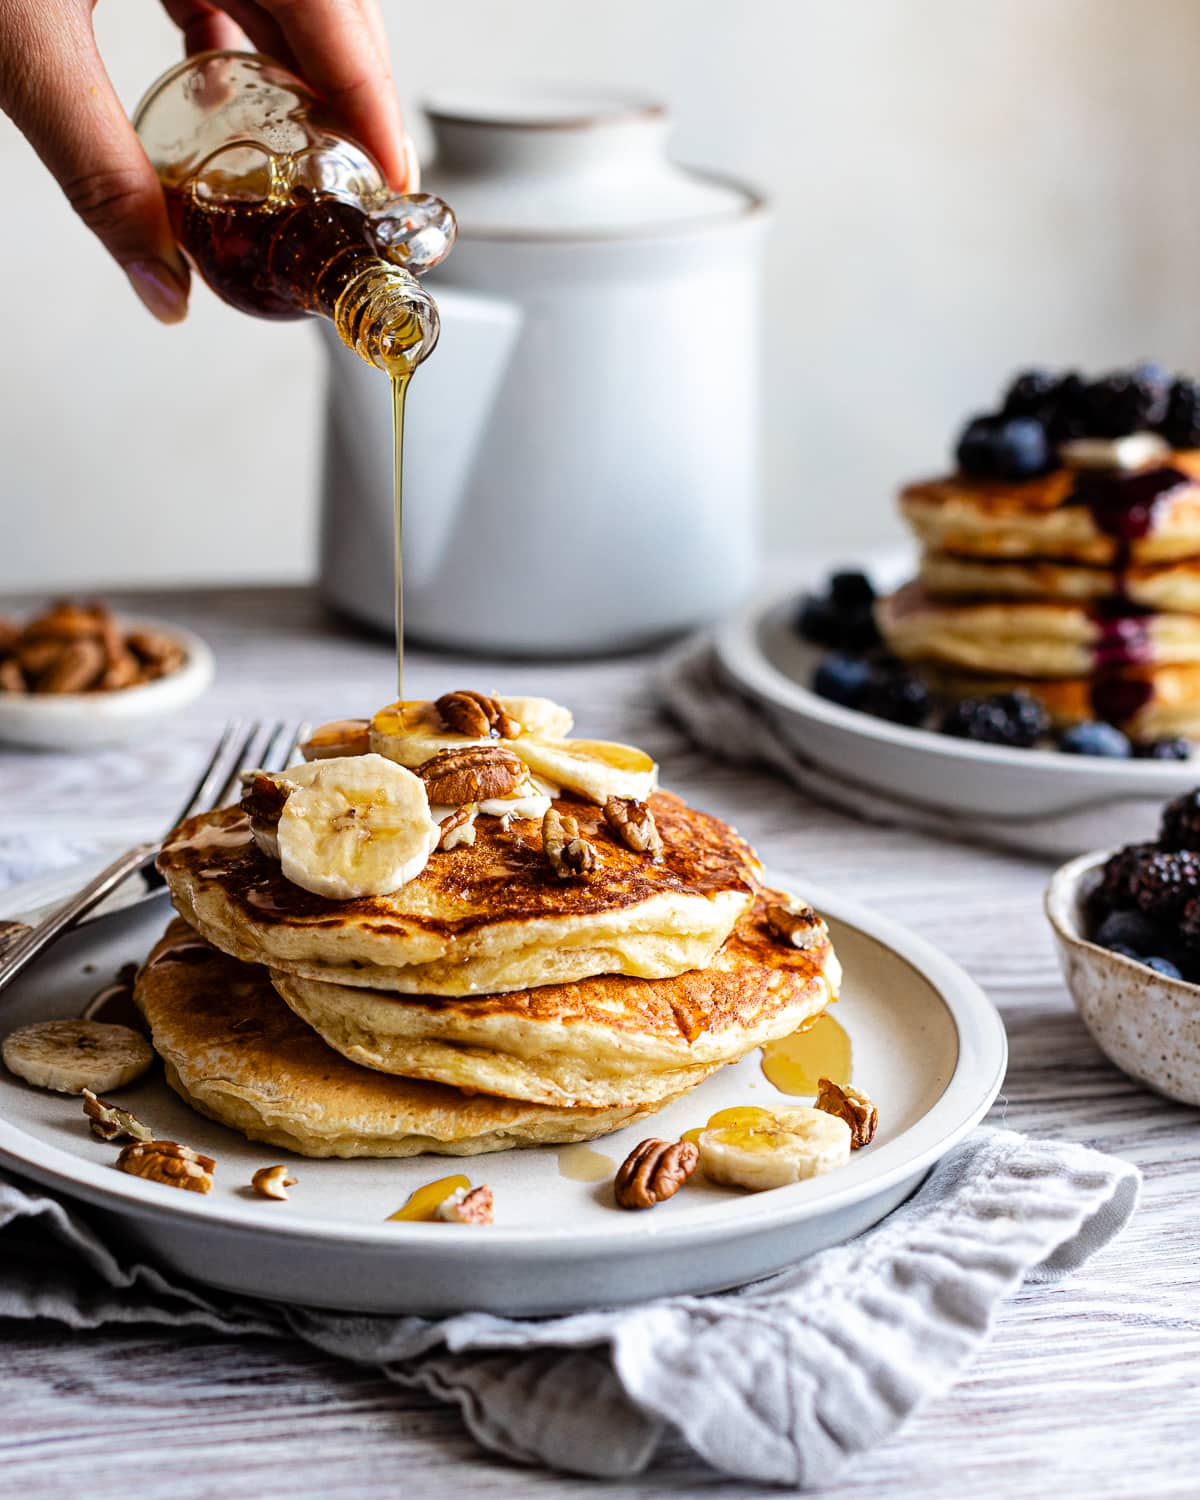 maple syrup drizzled on stack of pancakes